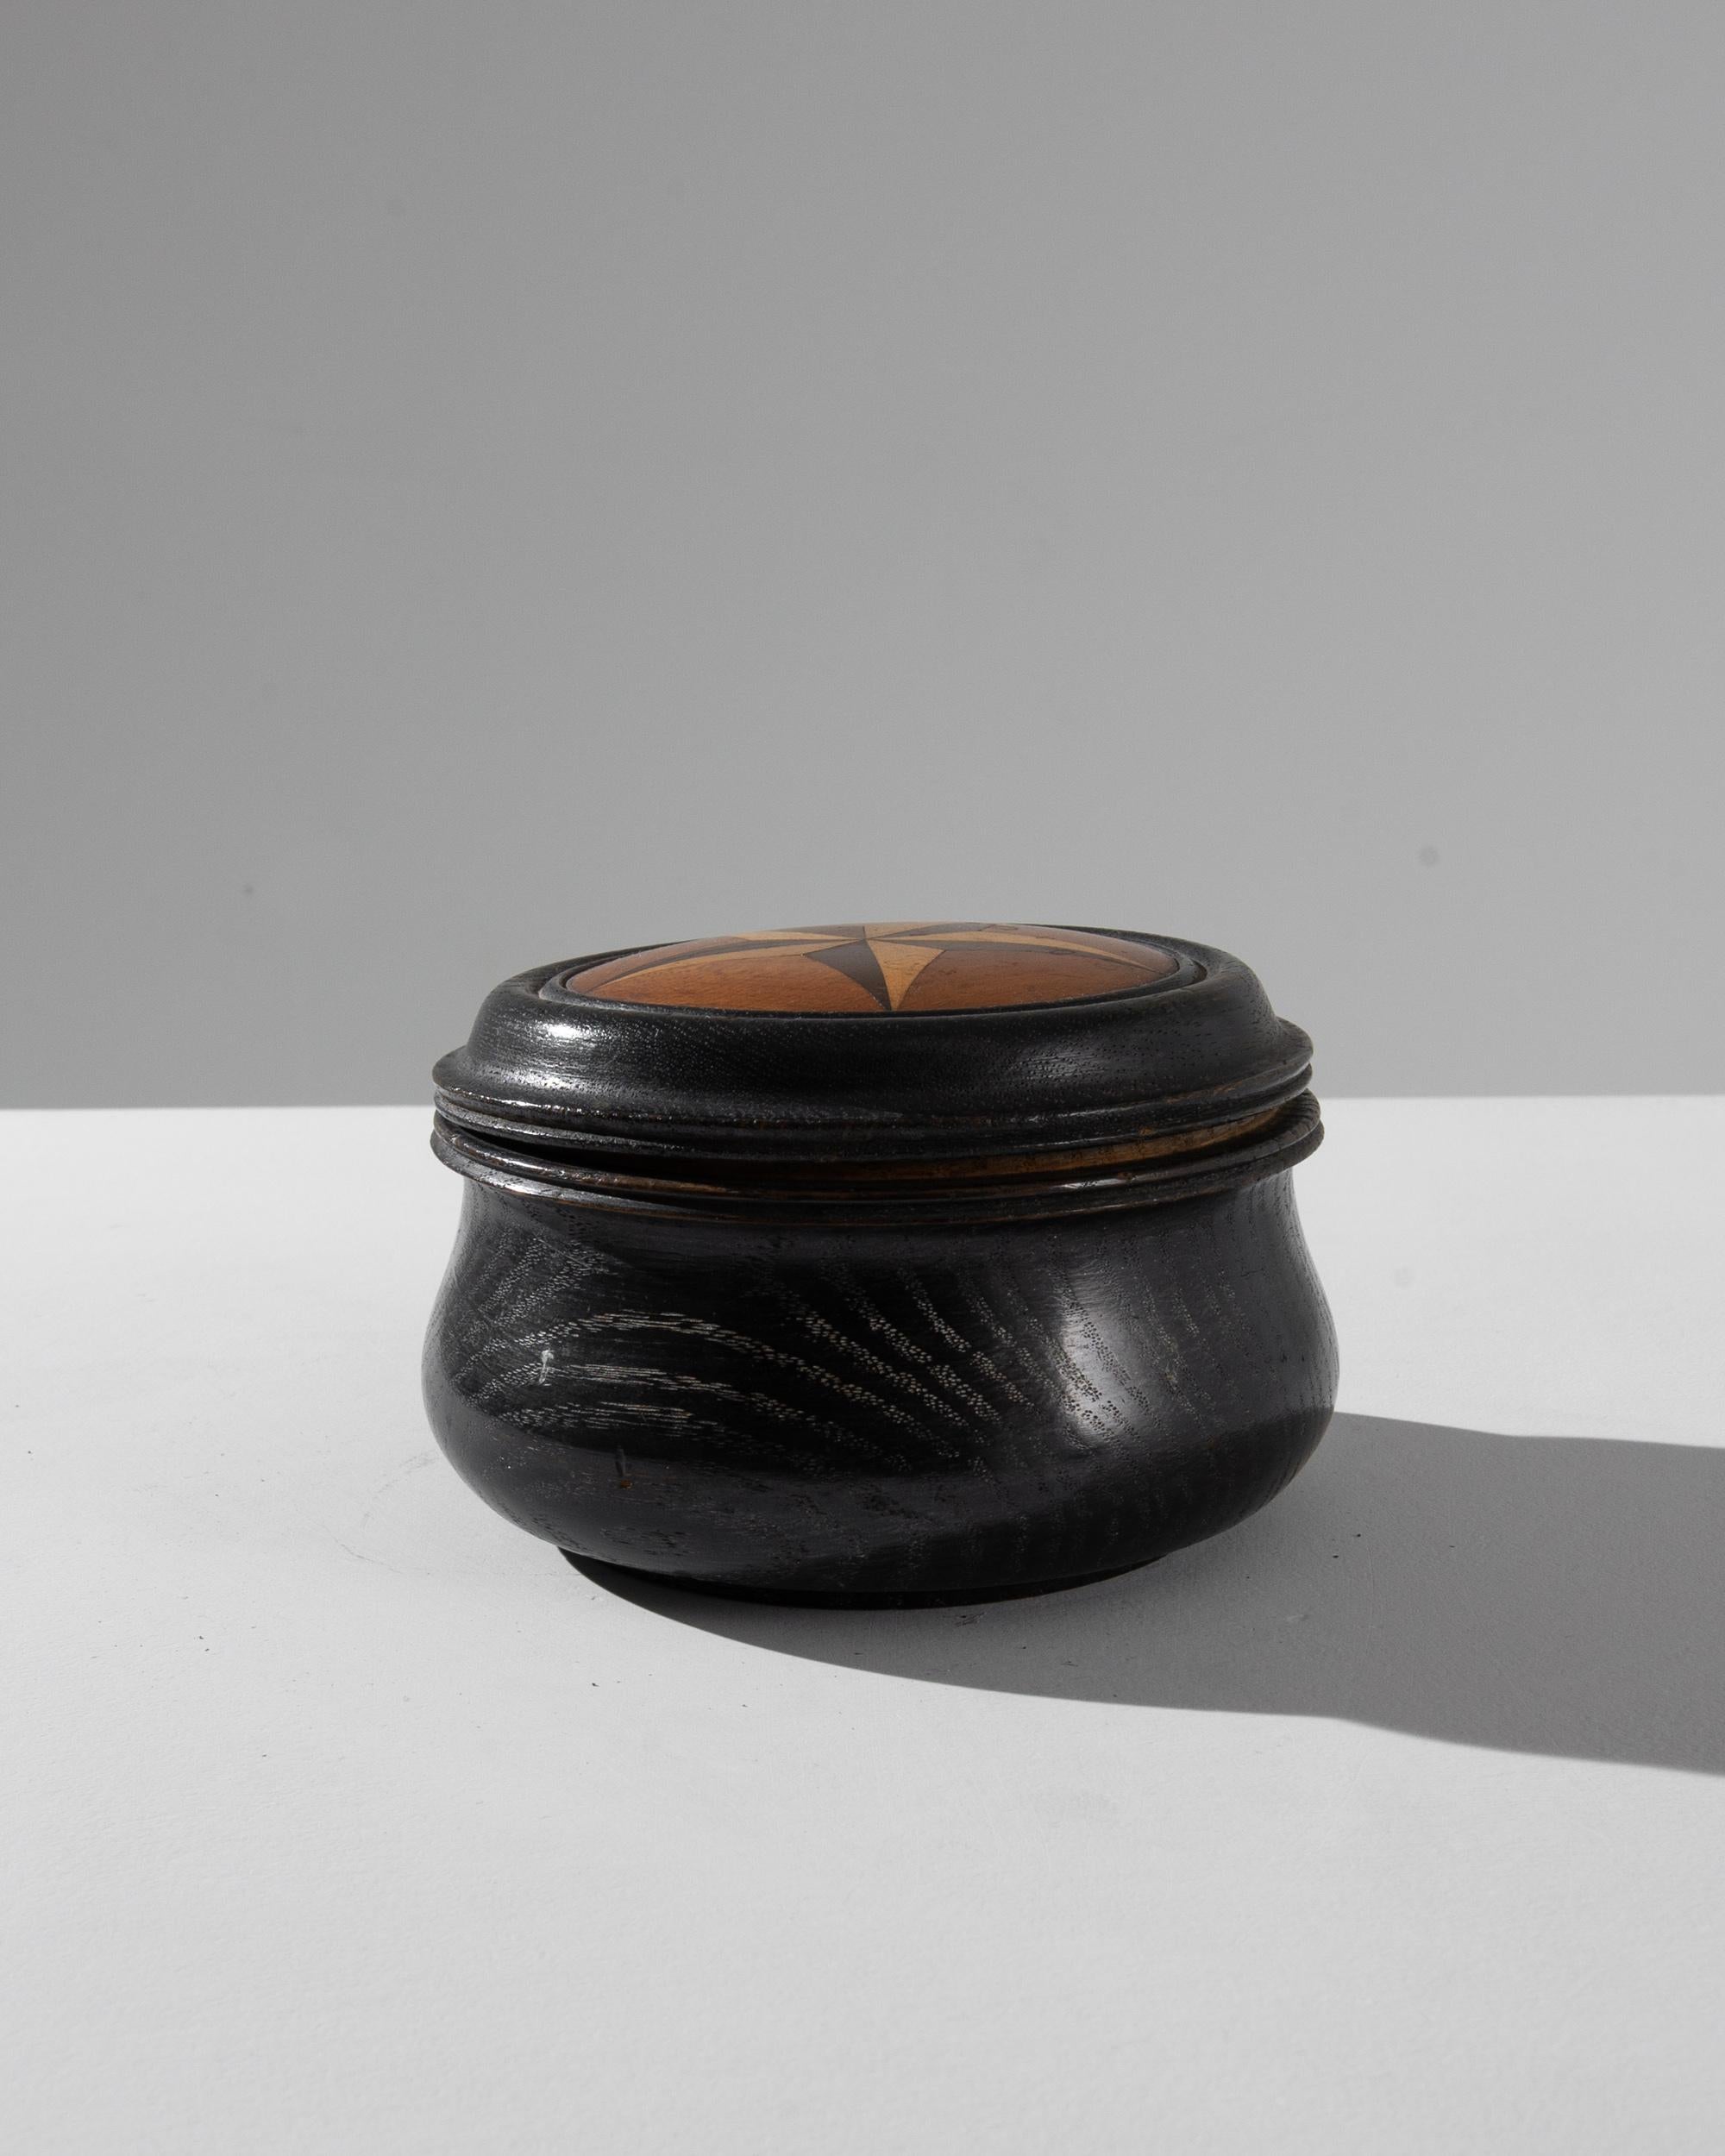 A 20th century polished wooden box produced in France, this antique mysterious object showcases a full shape and a lush black finish. 
Adorned with an inlaid five pointed star made of a fine marquetry work, the small box exhibits a lush variety of